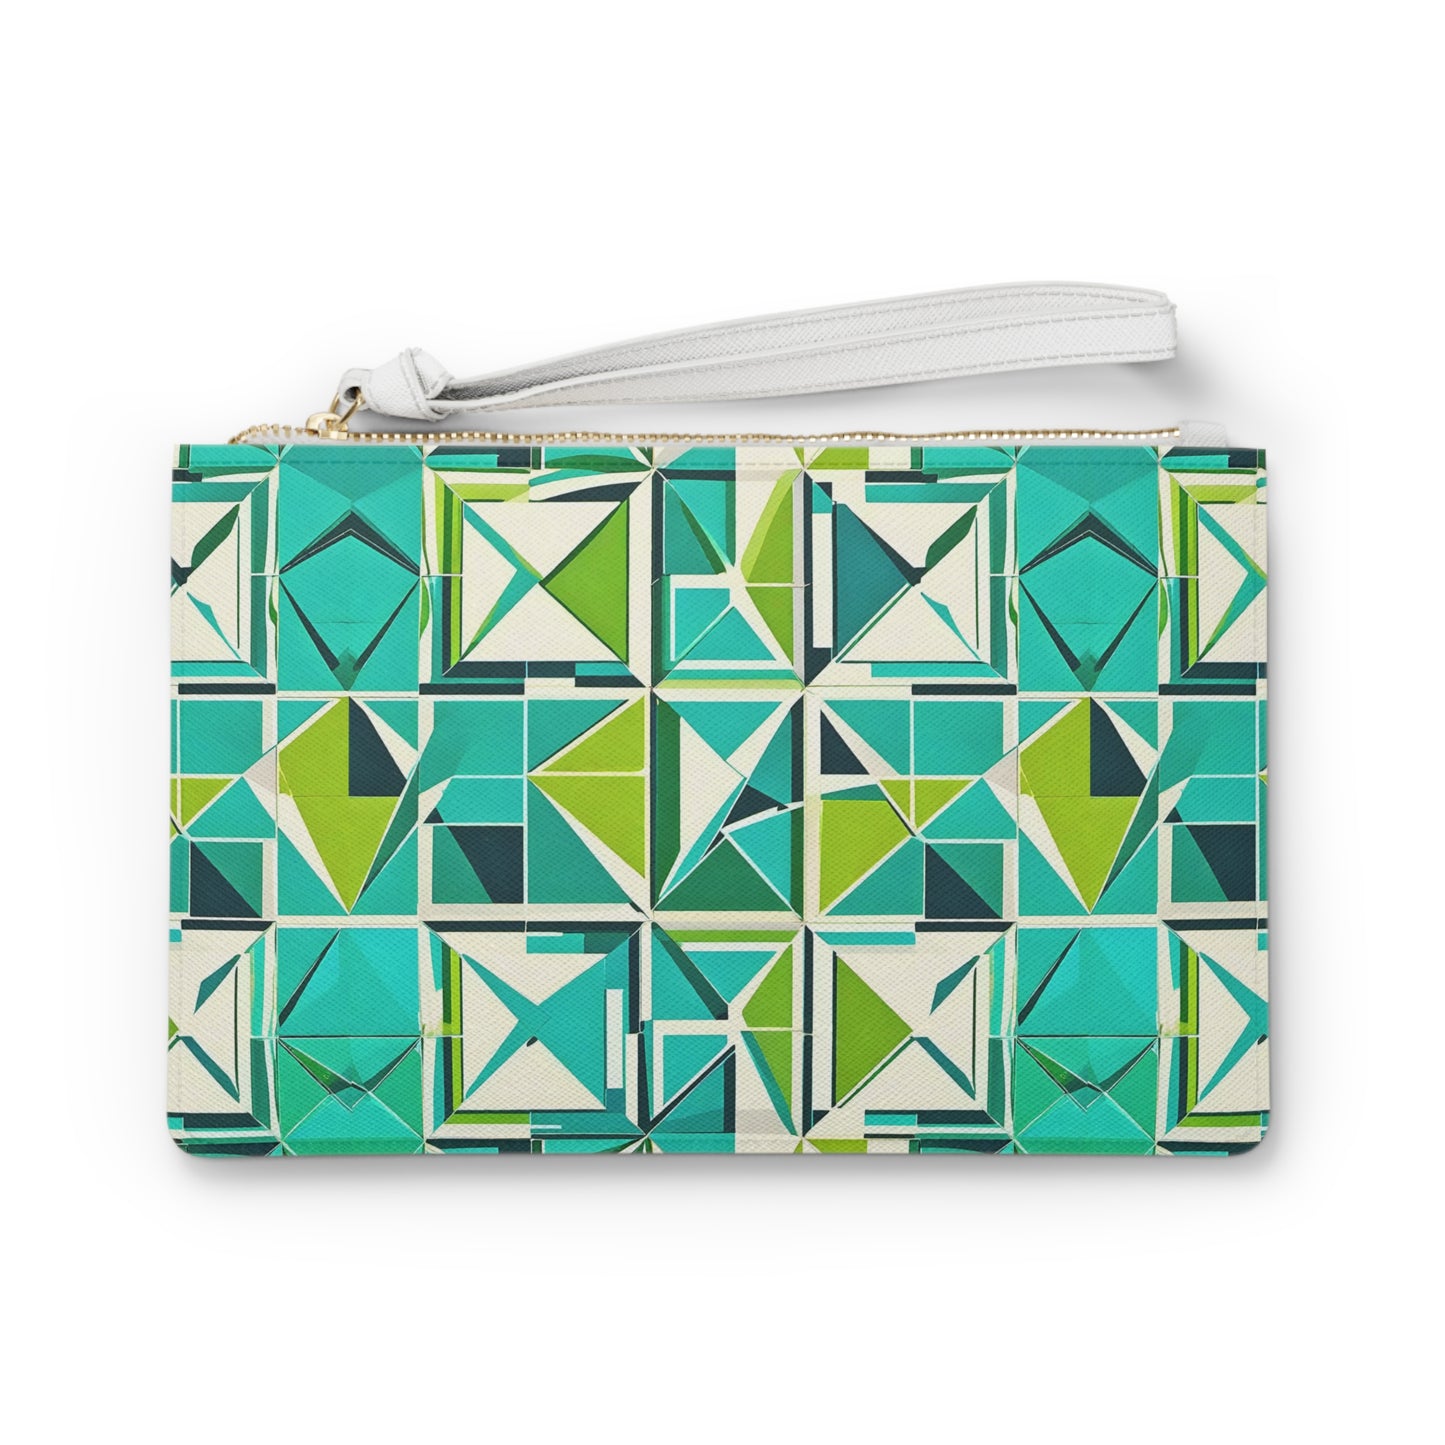 Midcentury Modern Cancun Vacation Tile Turquoise and Green Geometric Pattern Travel Pouch Clutch Bag